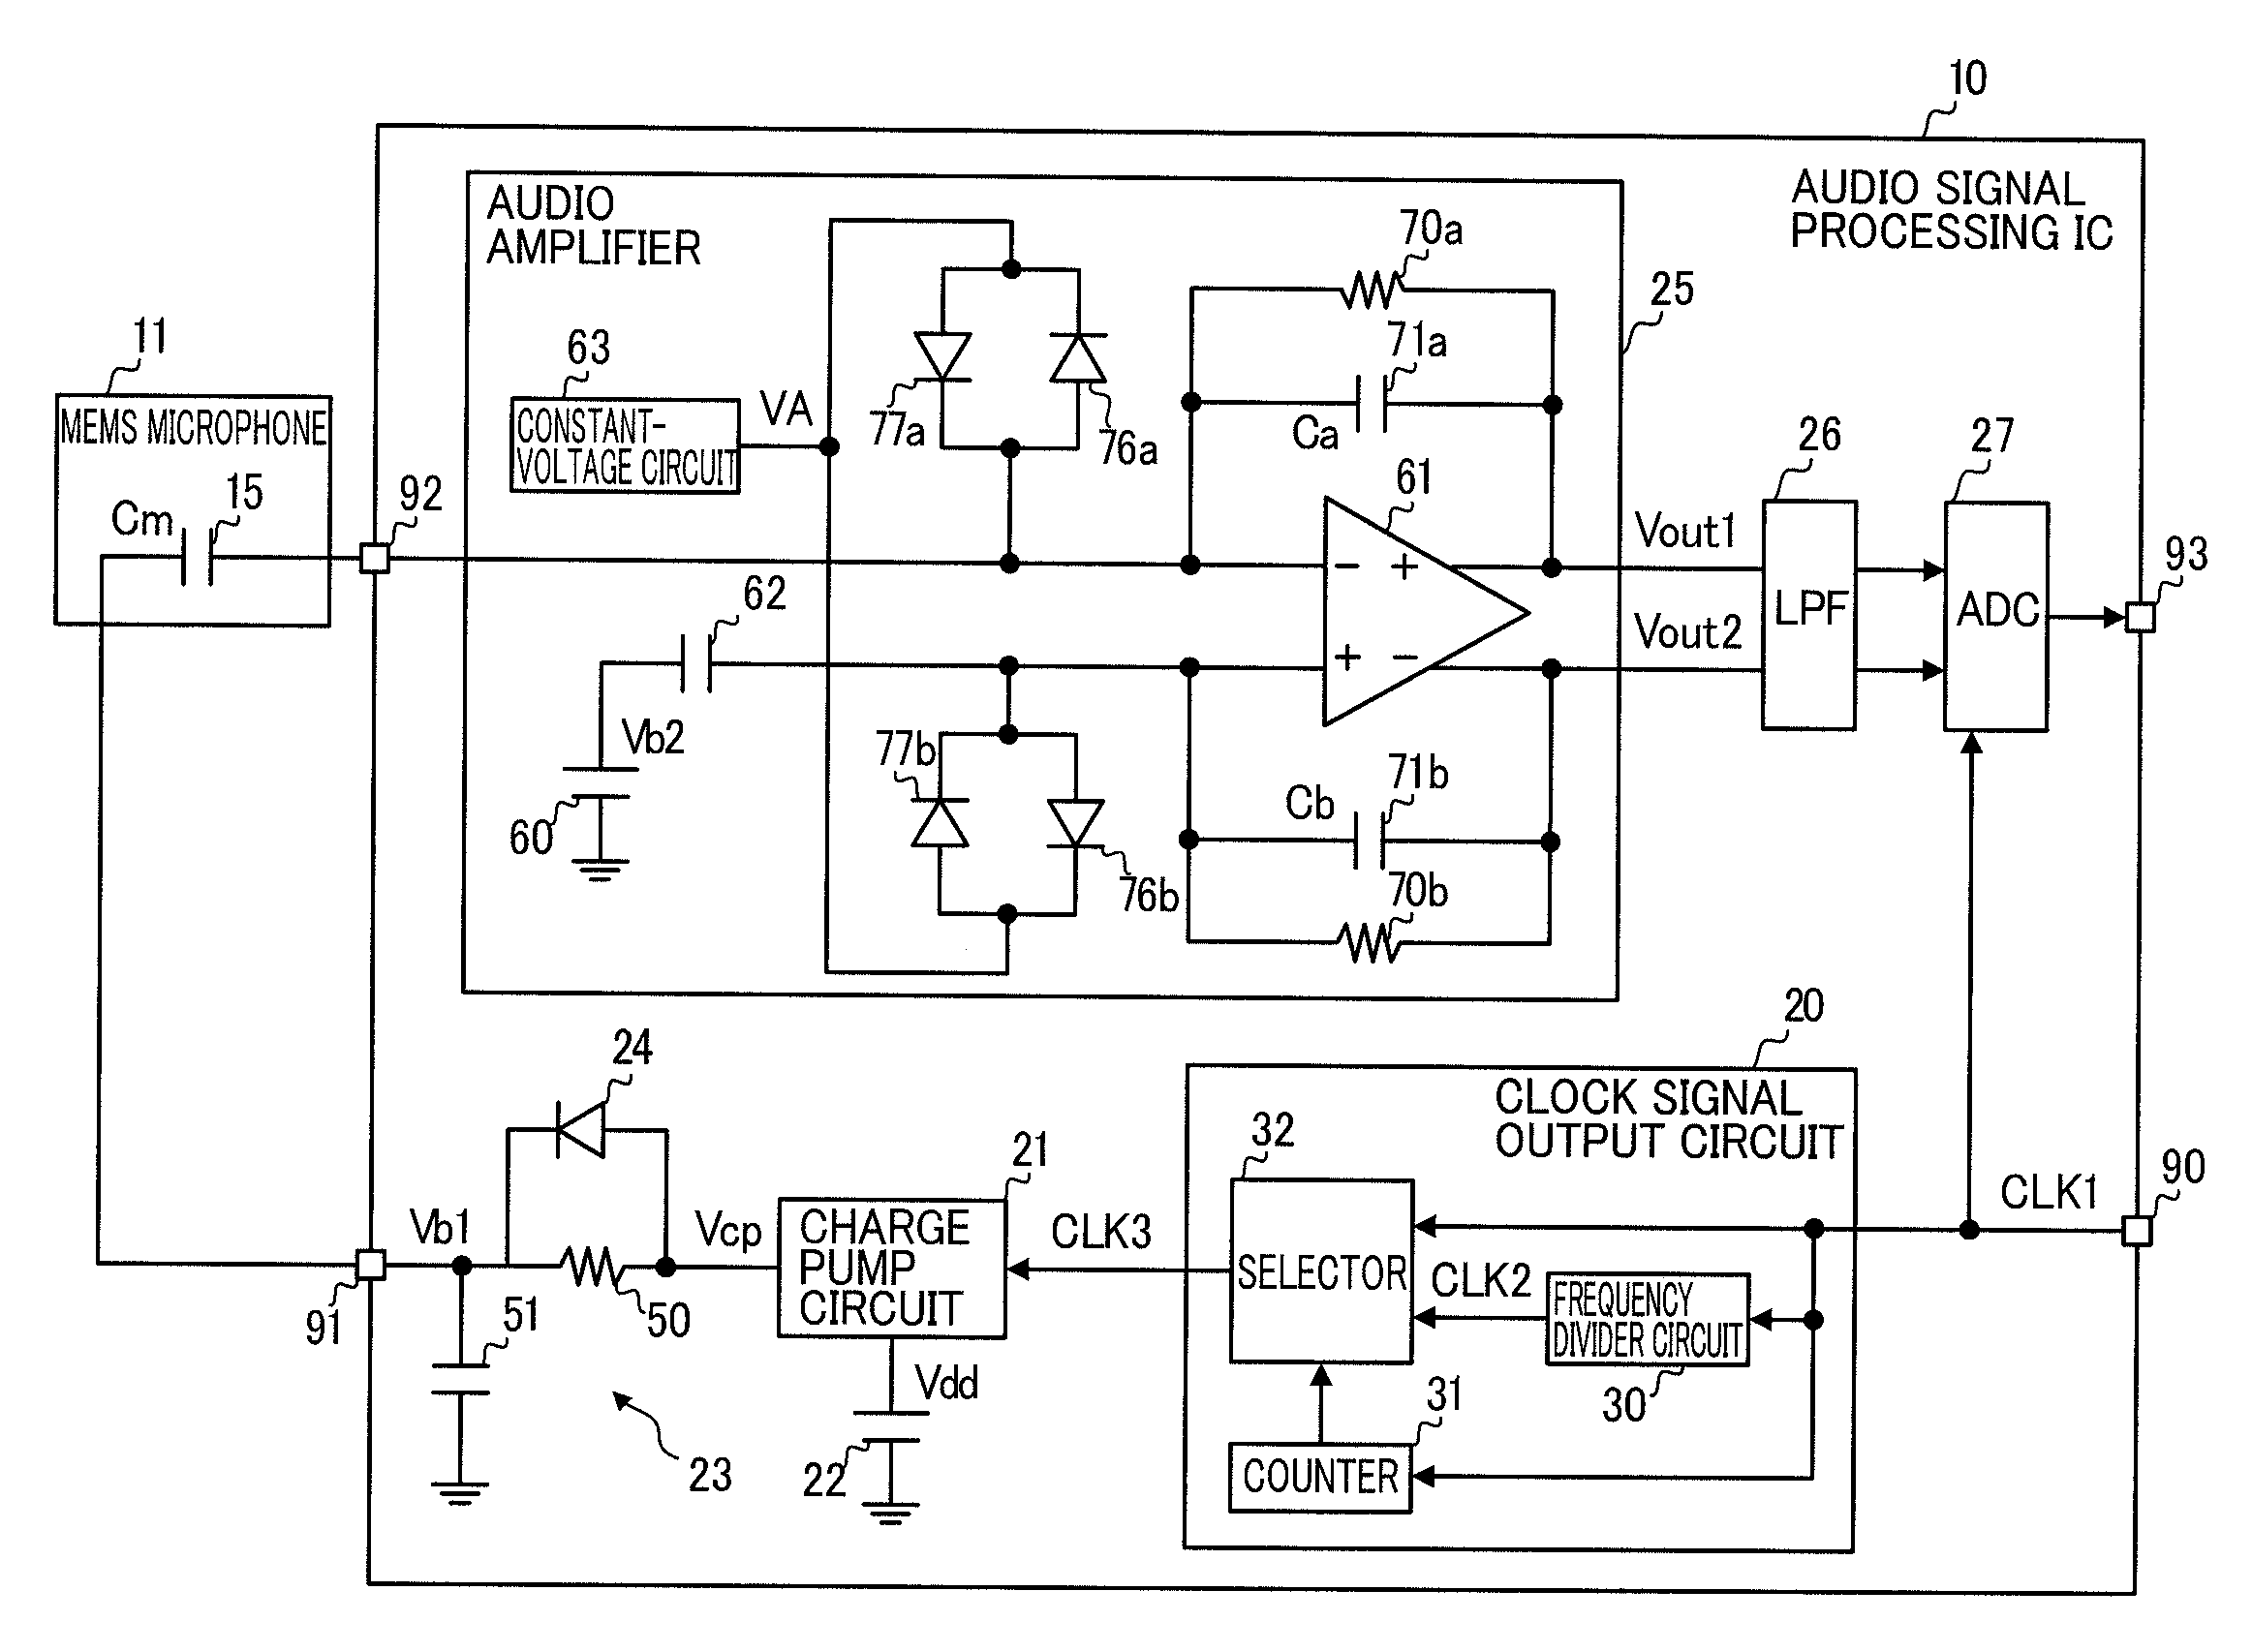 Charging circuit and amplifier